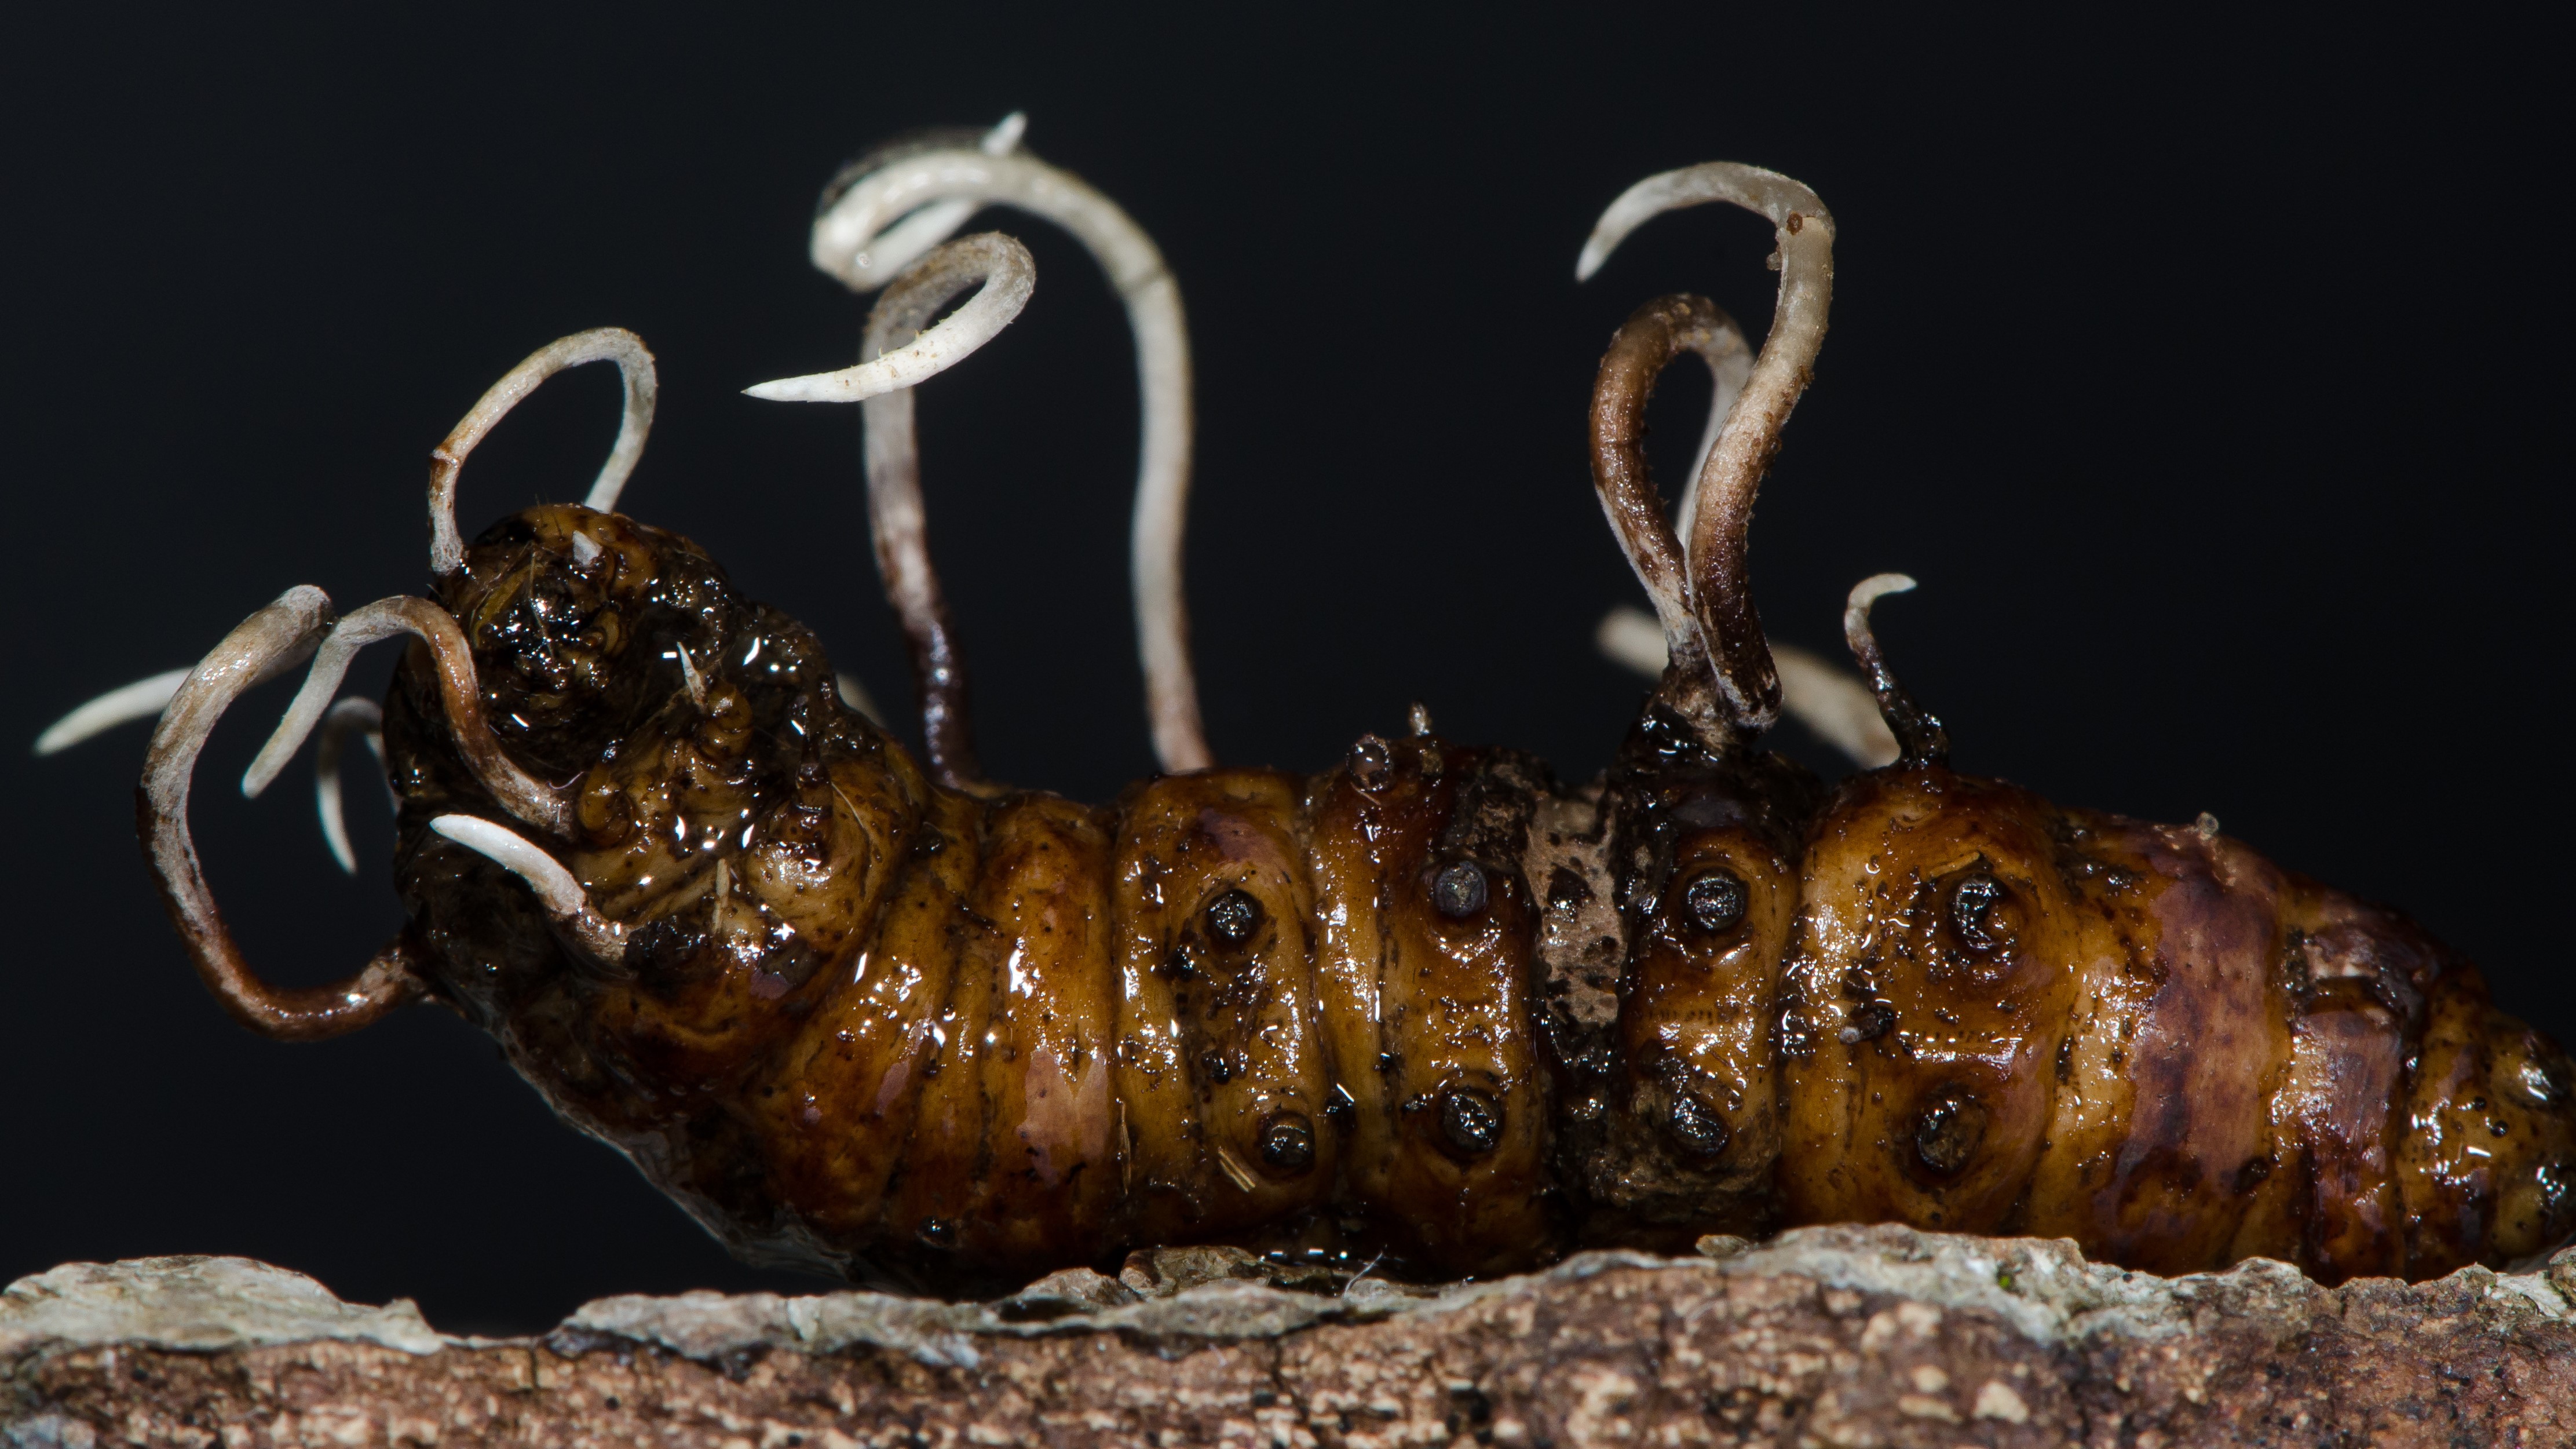 The parasitic fungus cordyceps entomorrhiza emerging from body of larva of beetle in the family Cerambycidae on a piece of bark with a black background